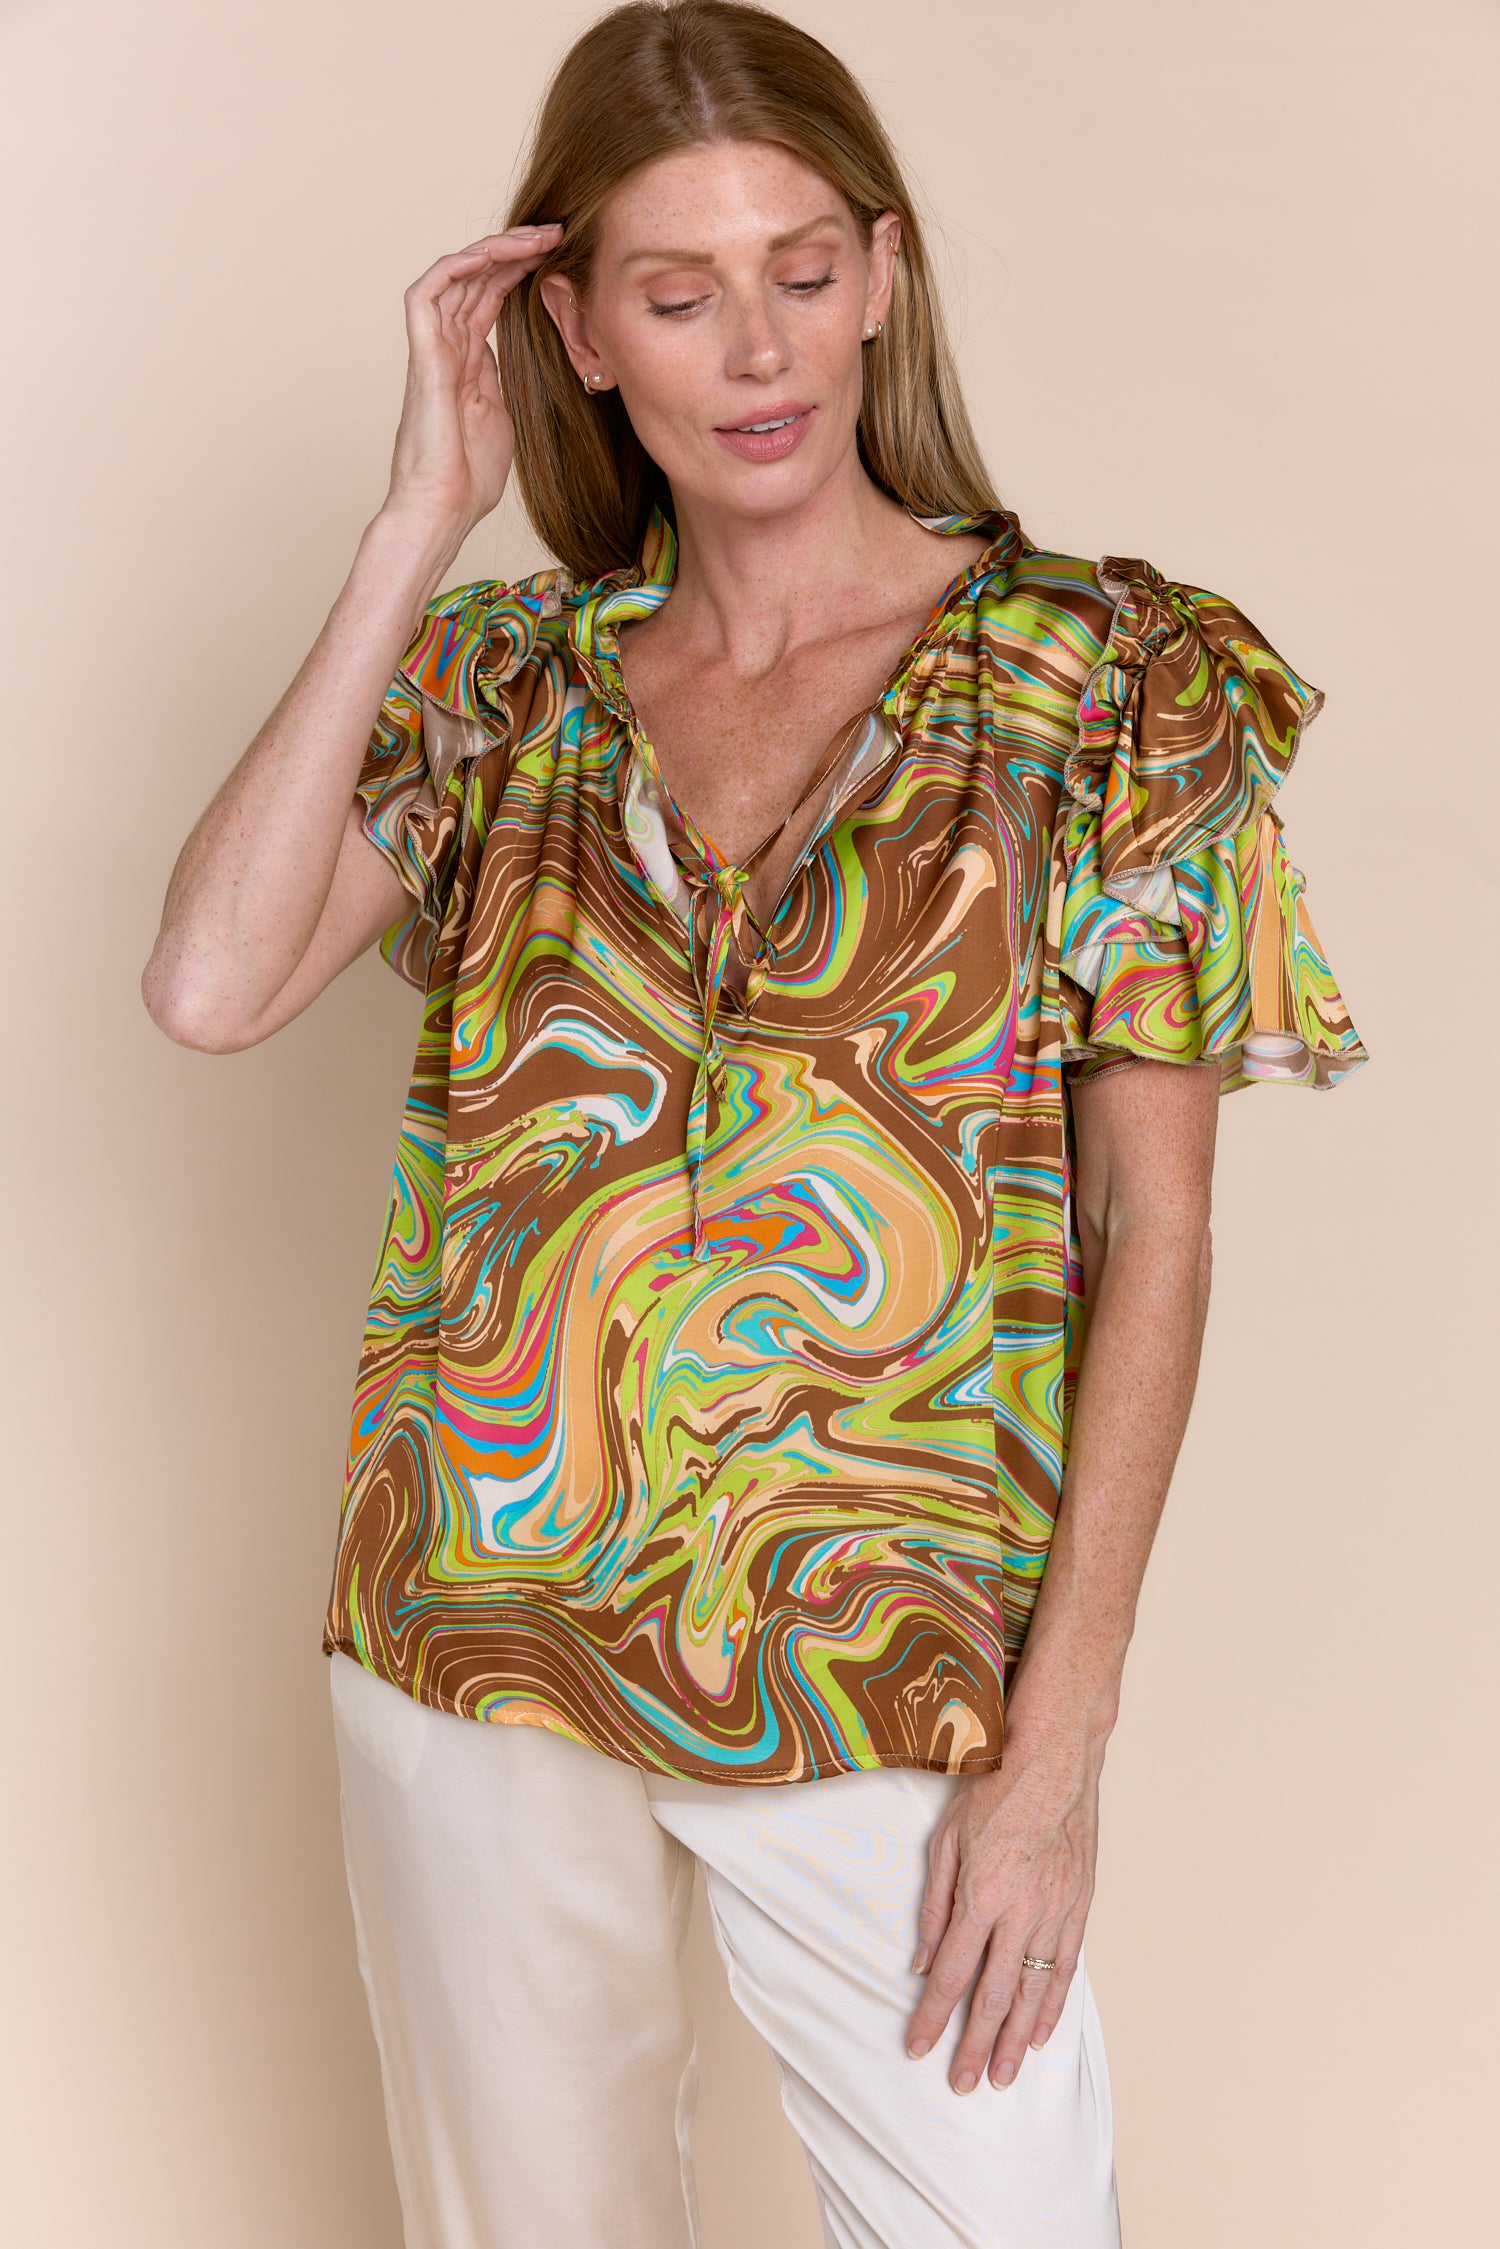 Satin and Silk Tops for Women I SOFIA COLLECTIONS Italian Tops 